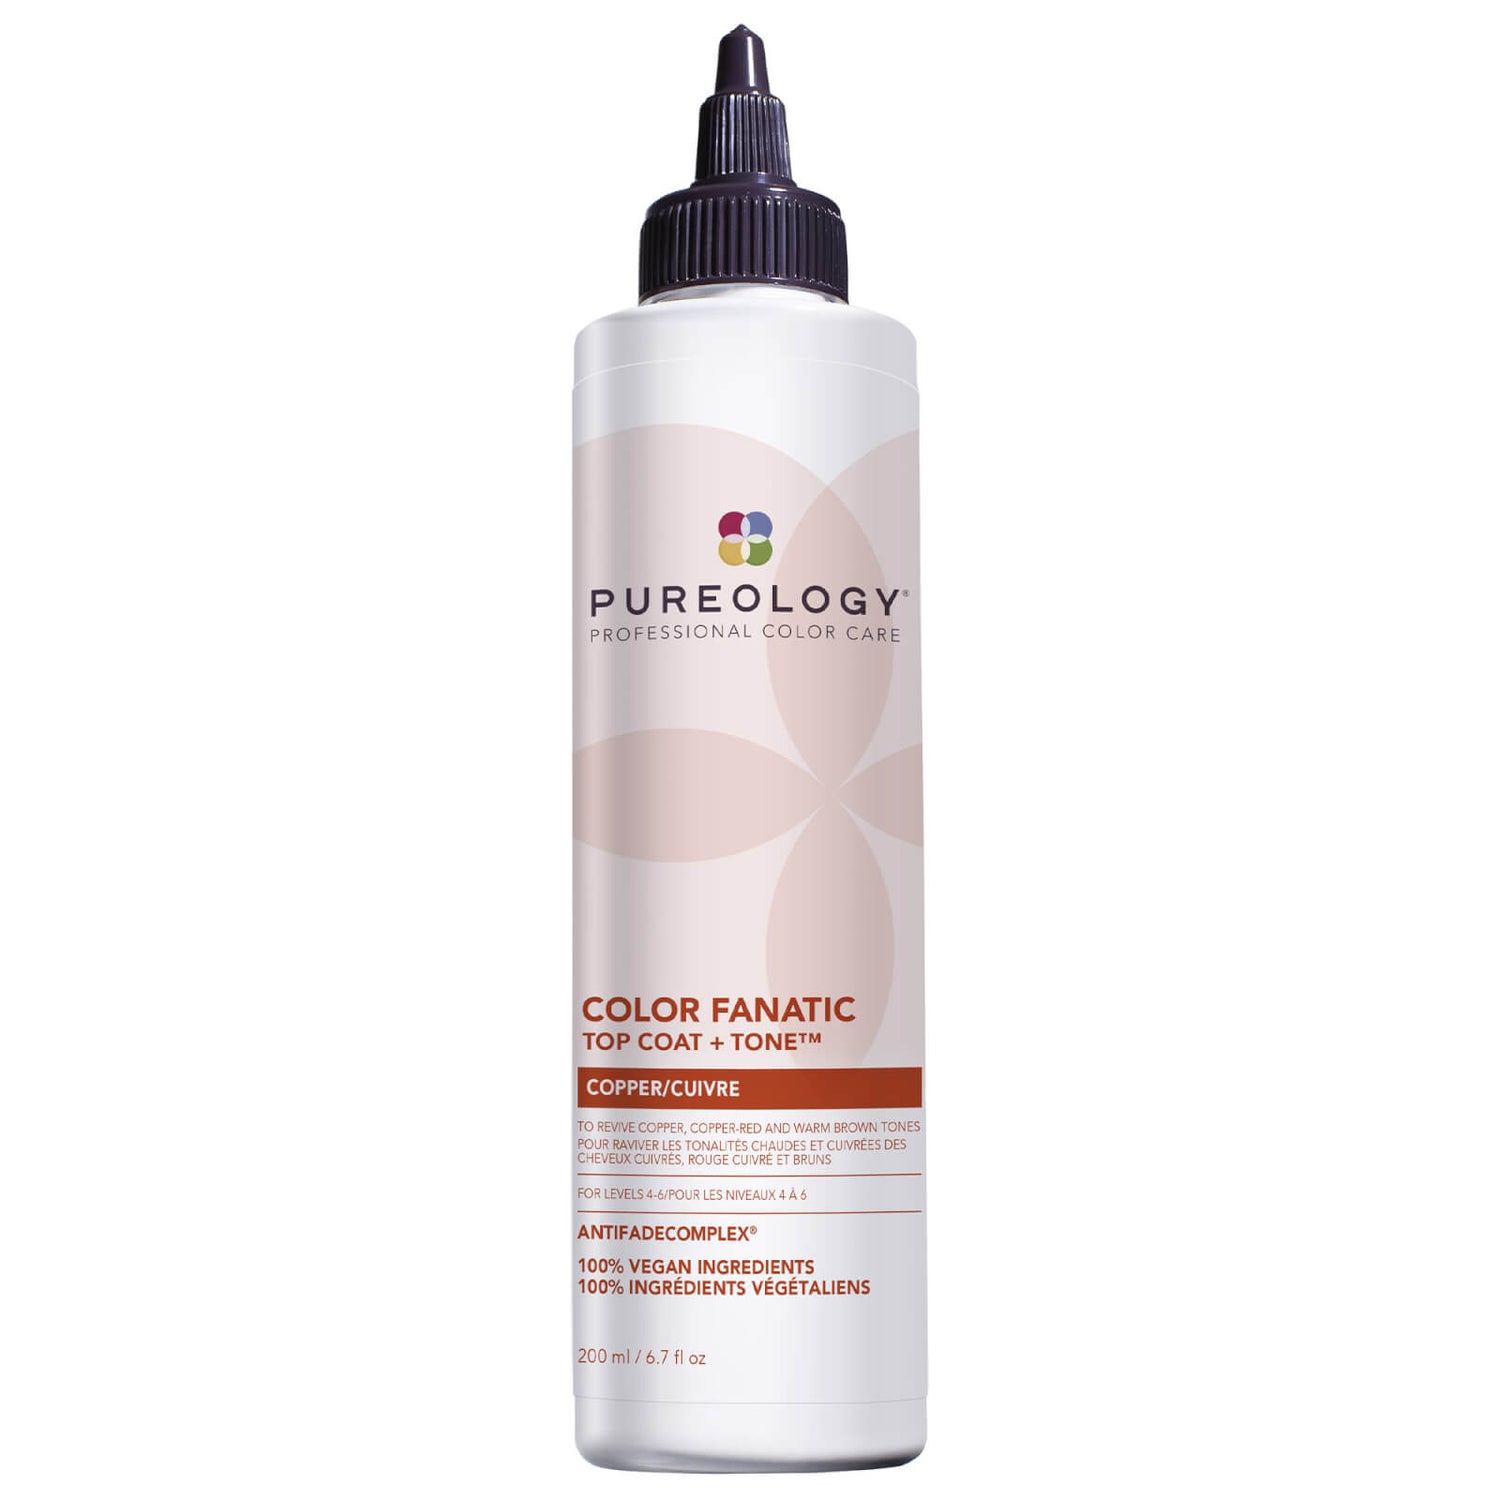 Pureology Color Fanatic Top Coat and Tone for Copper Hair Colour Protection 200ml